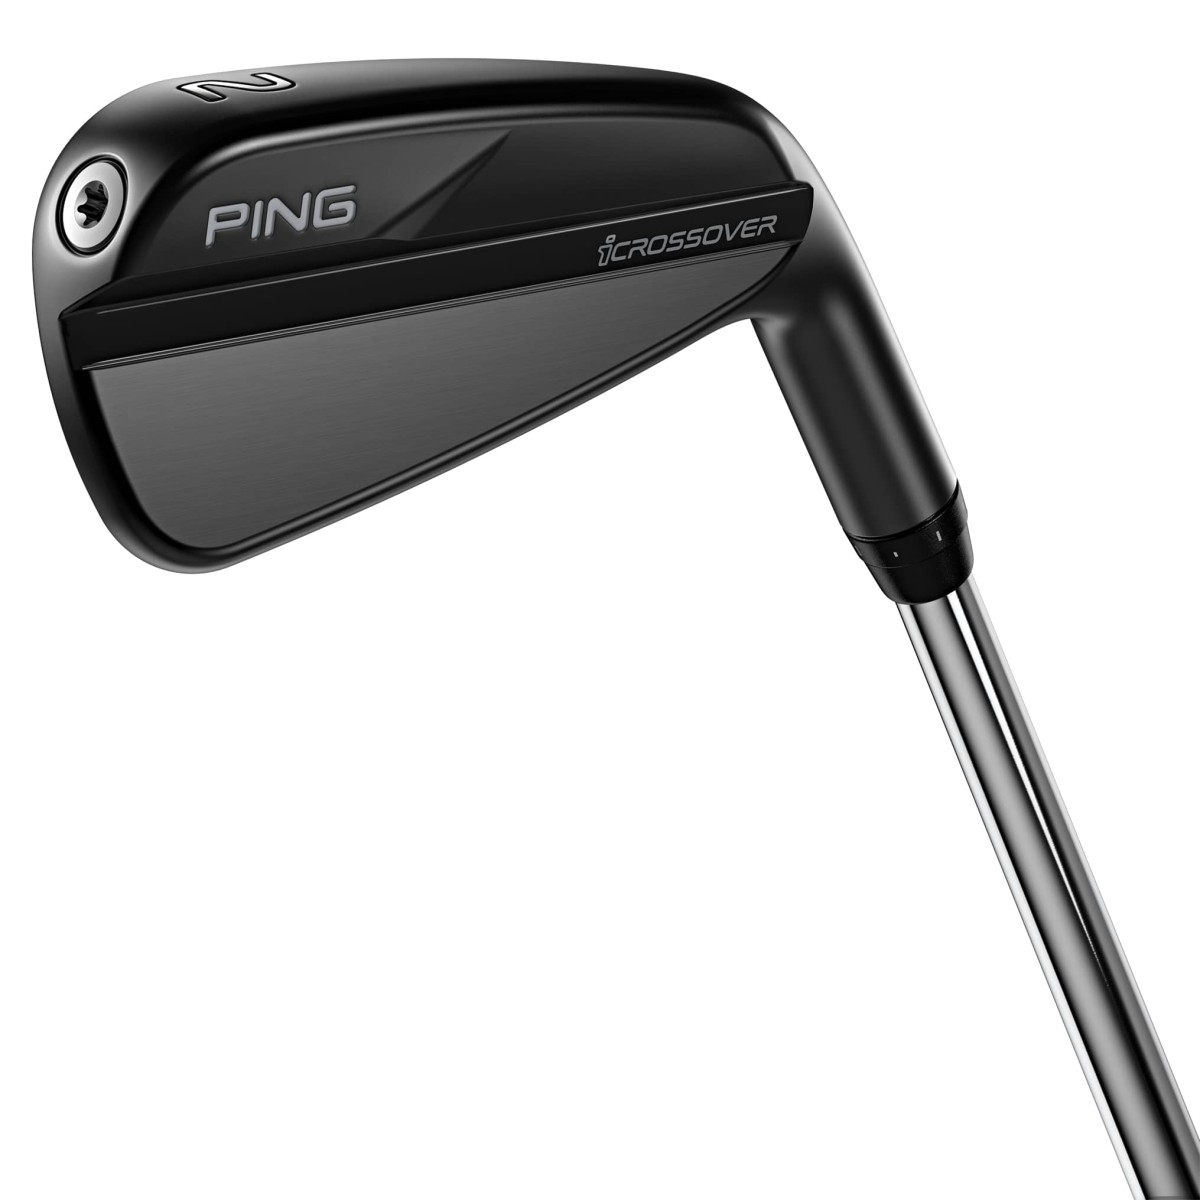 Ping driving iron i crossover custom only